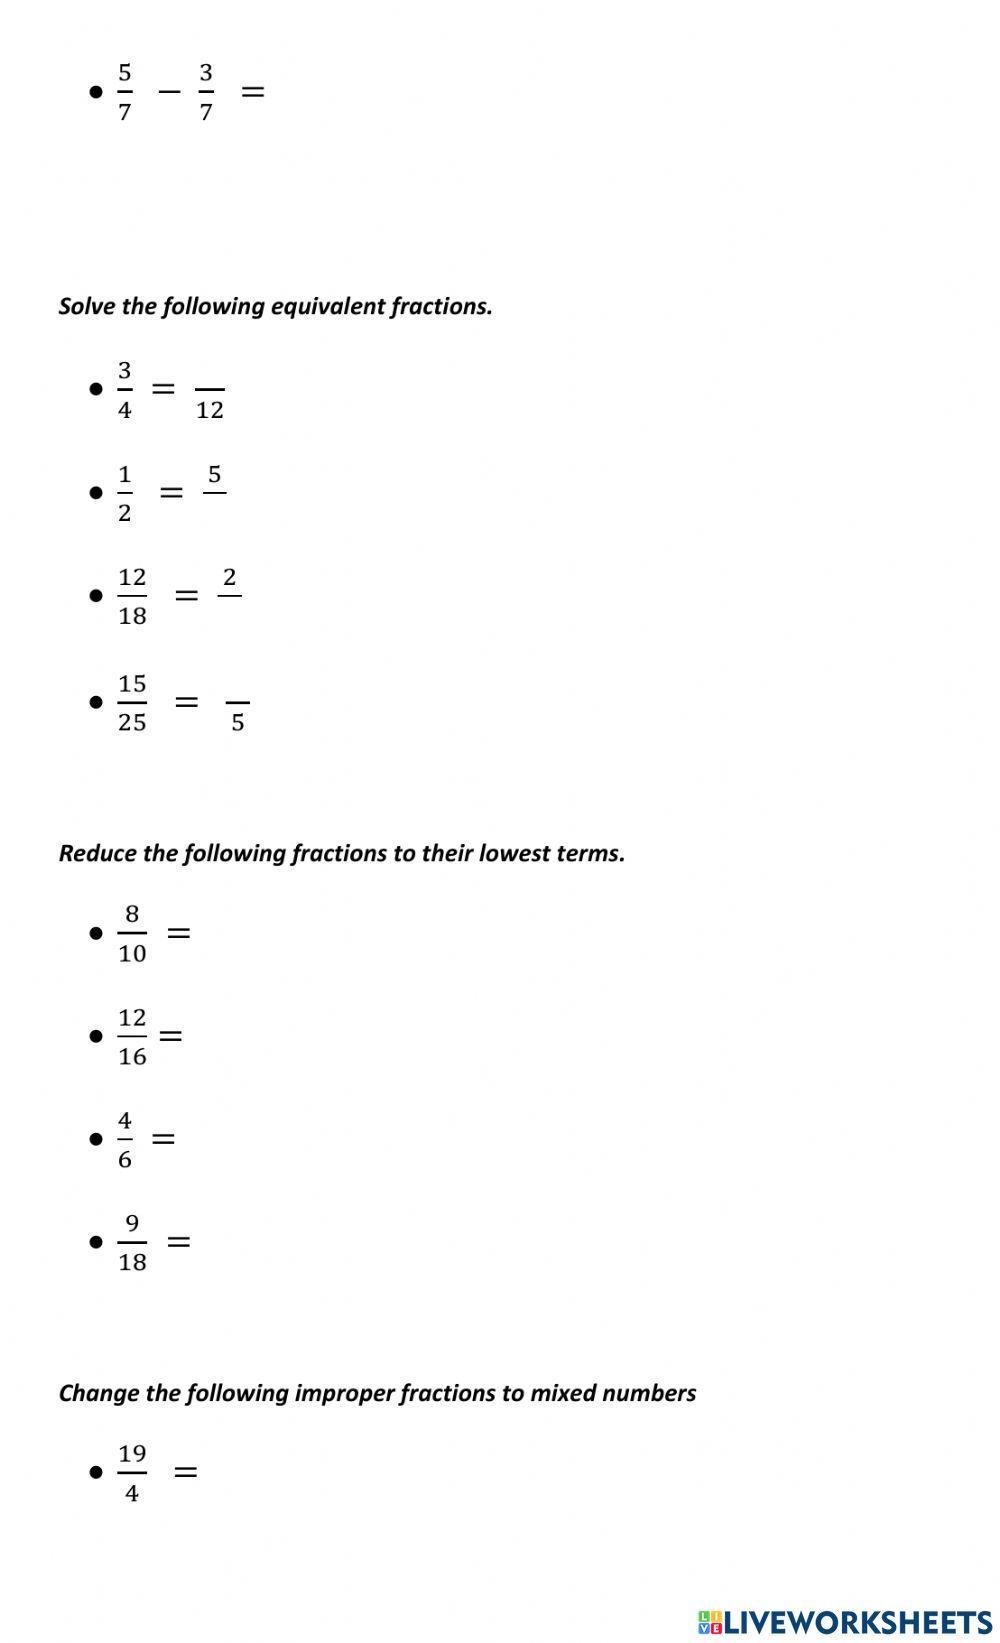 Fraction Revision